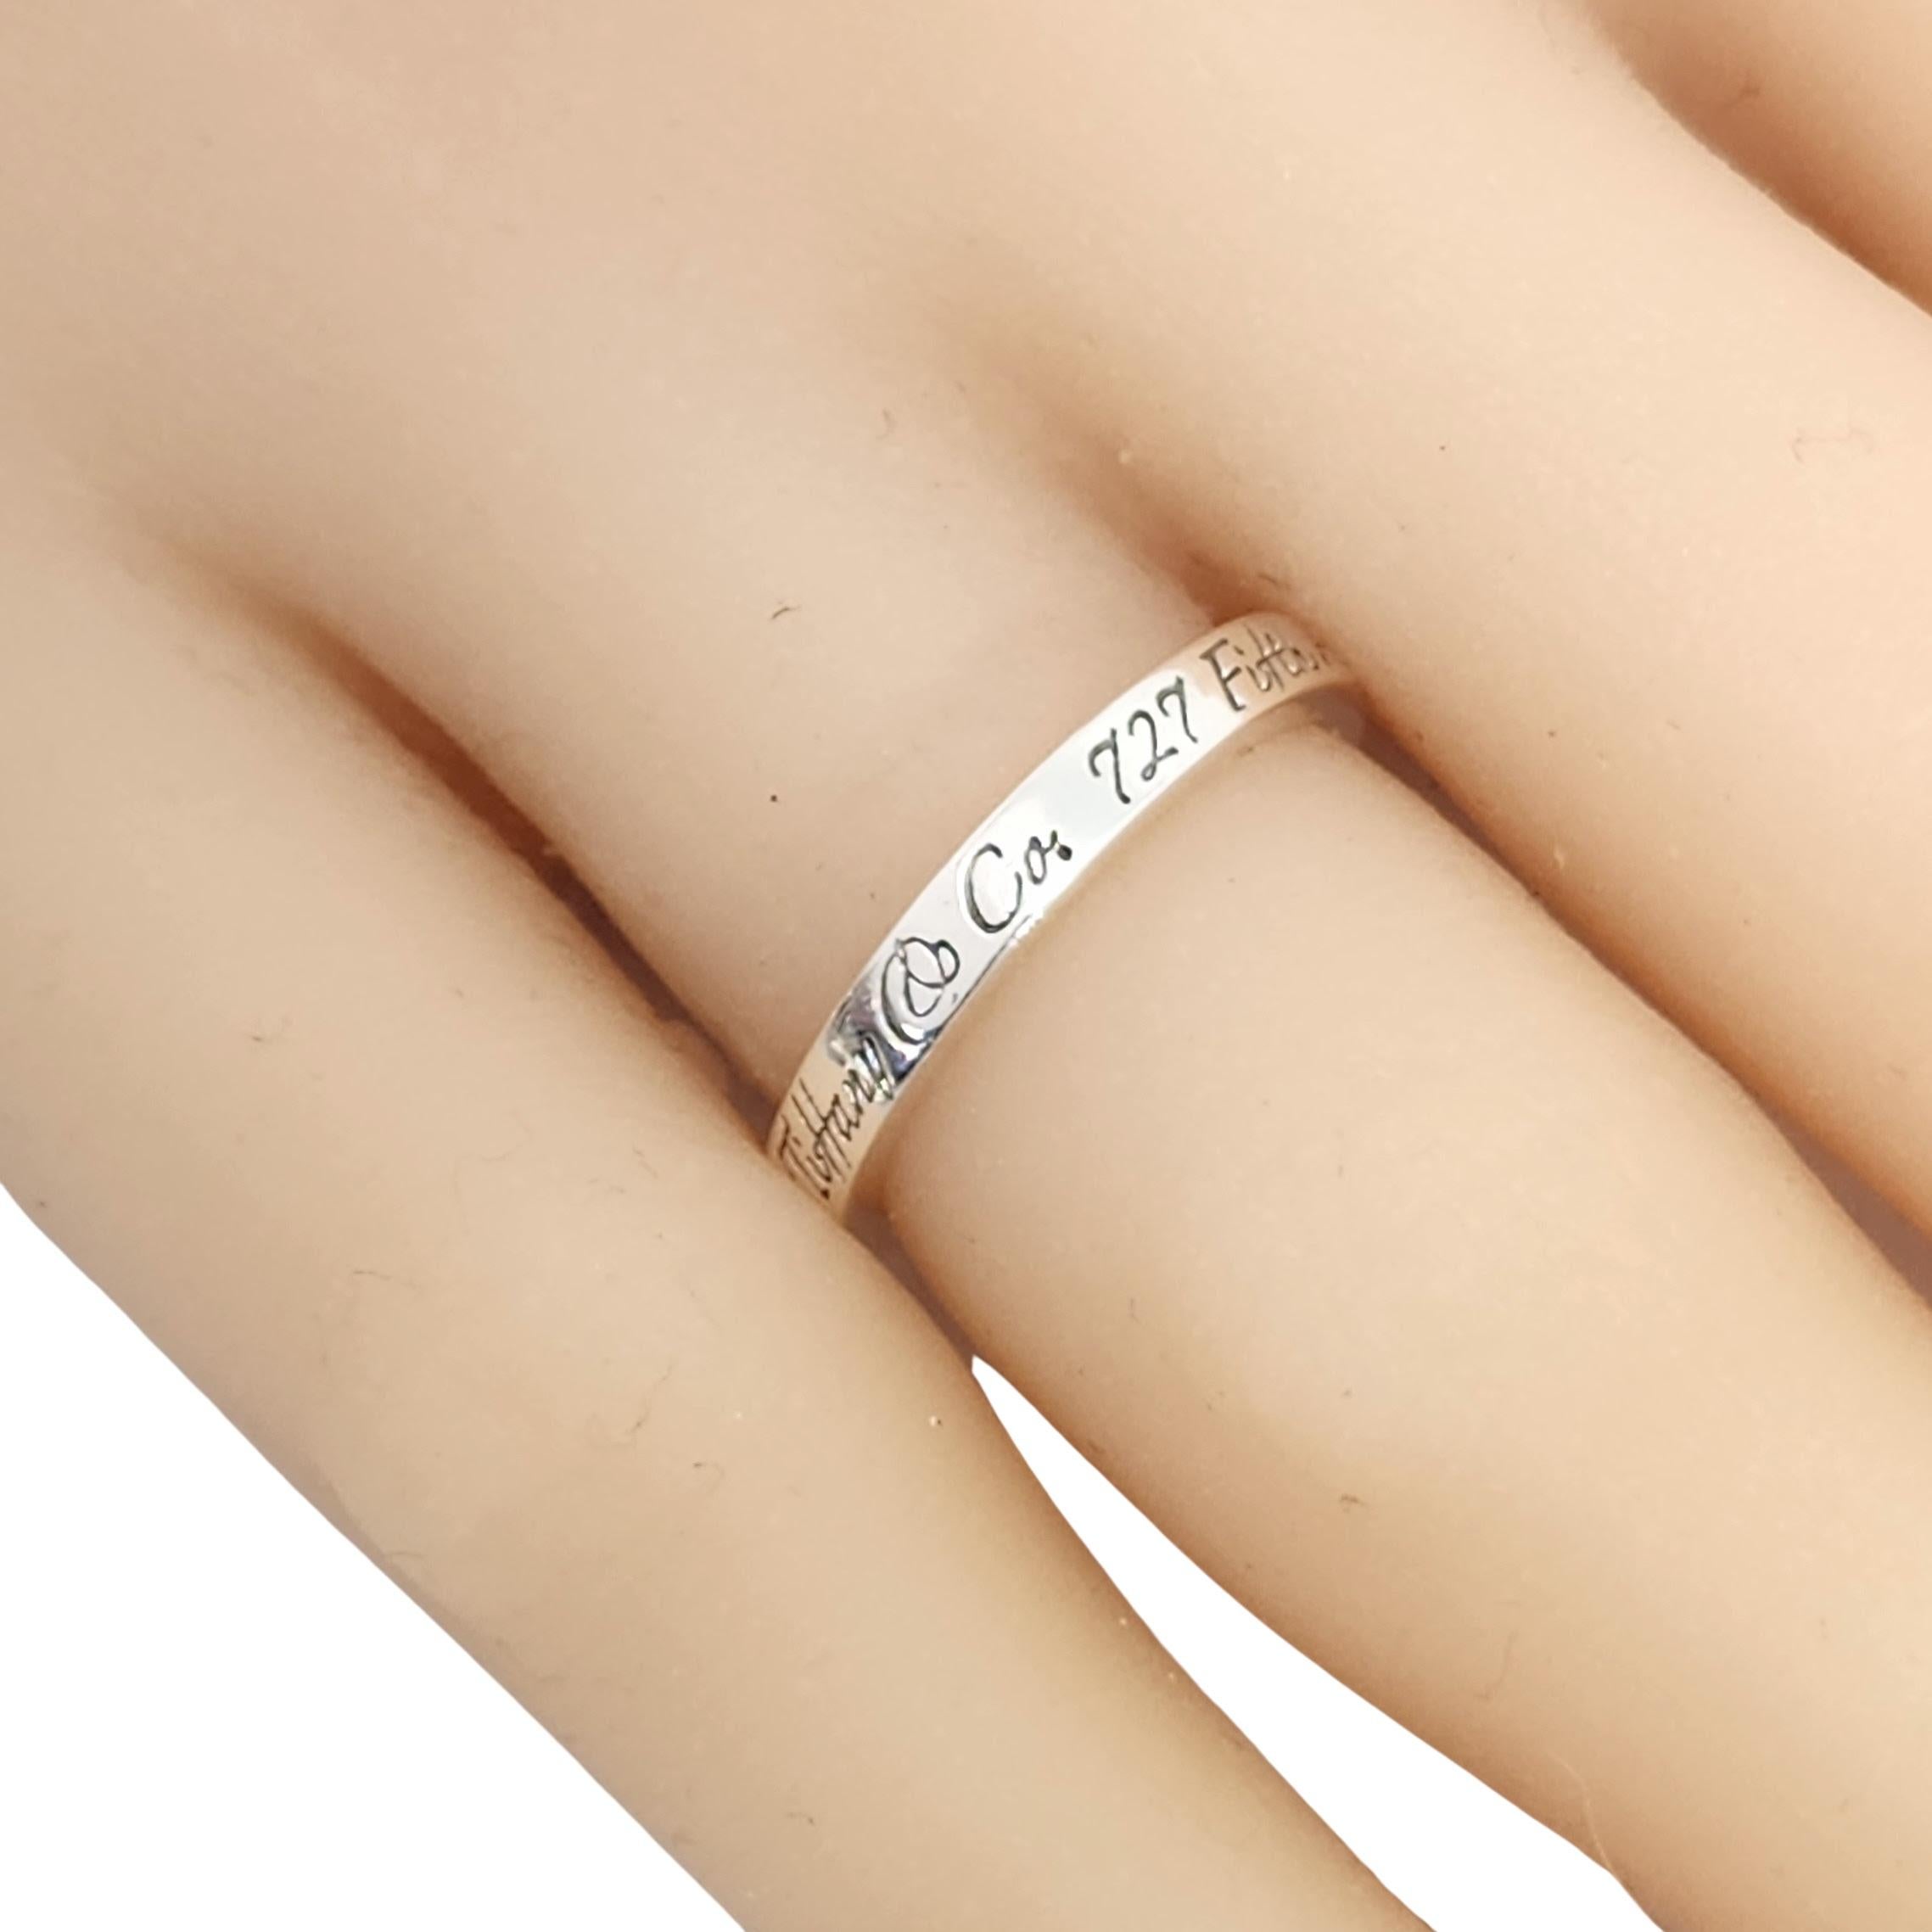 Tiffany & Co New York Address Notes Narrow Band Ring Taille 5,25 n°13007 en vente 5